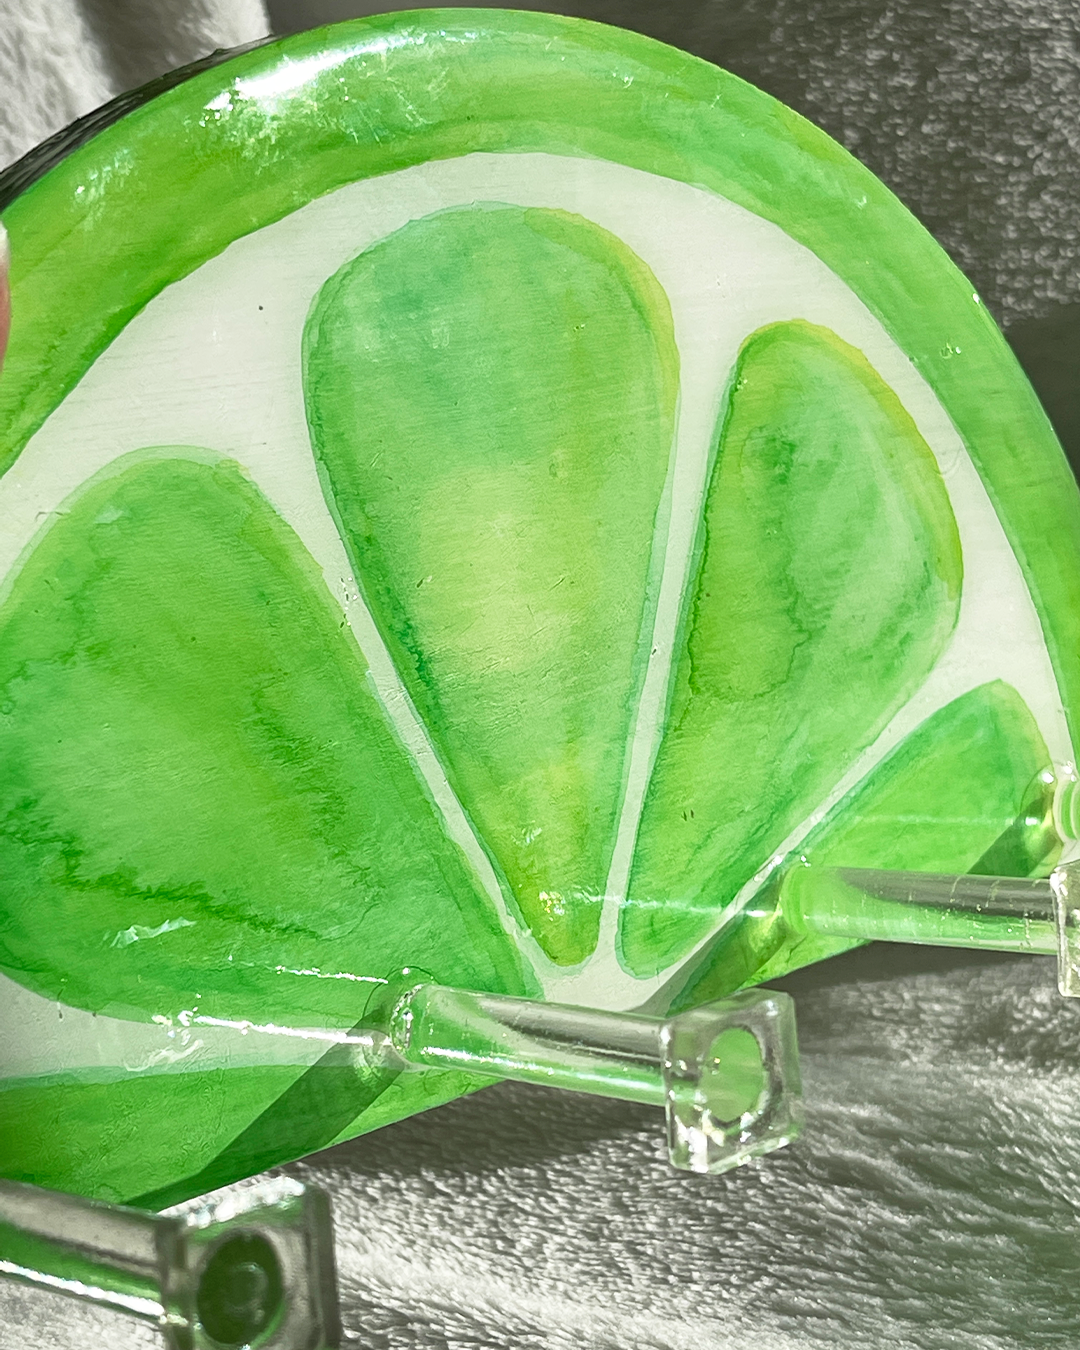 Hand-painted lime slice key holder, combining vibrant green hues and realistic citrus design on a wooden base